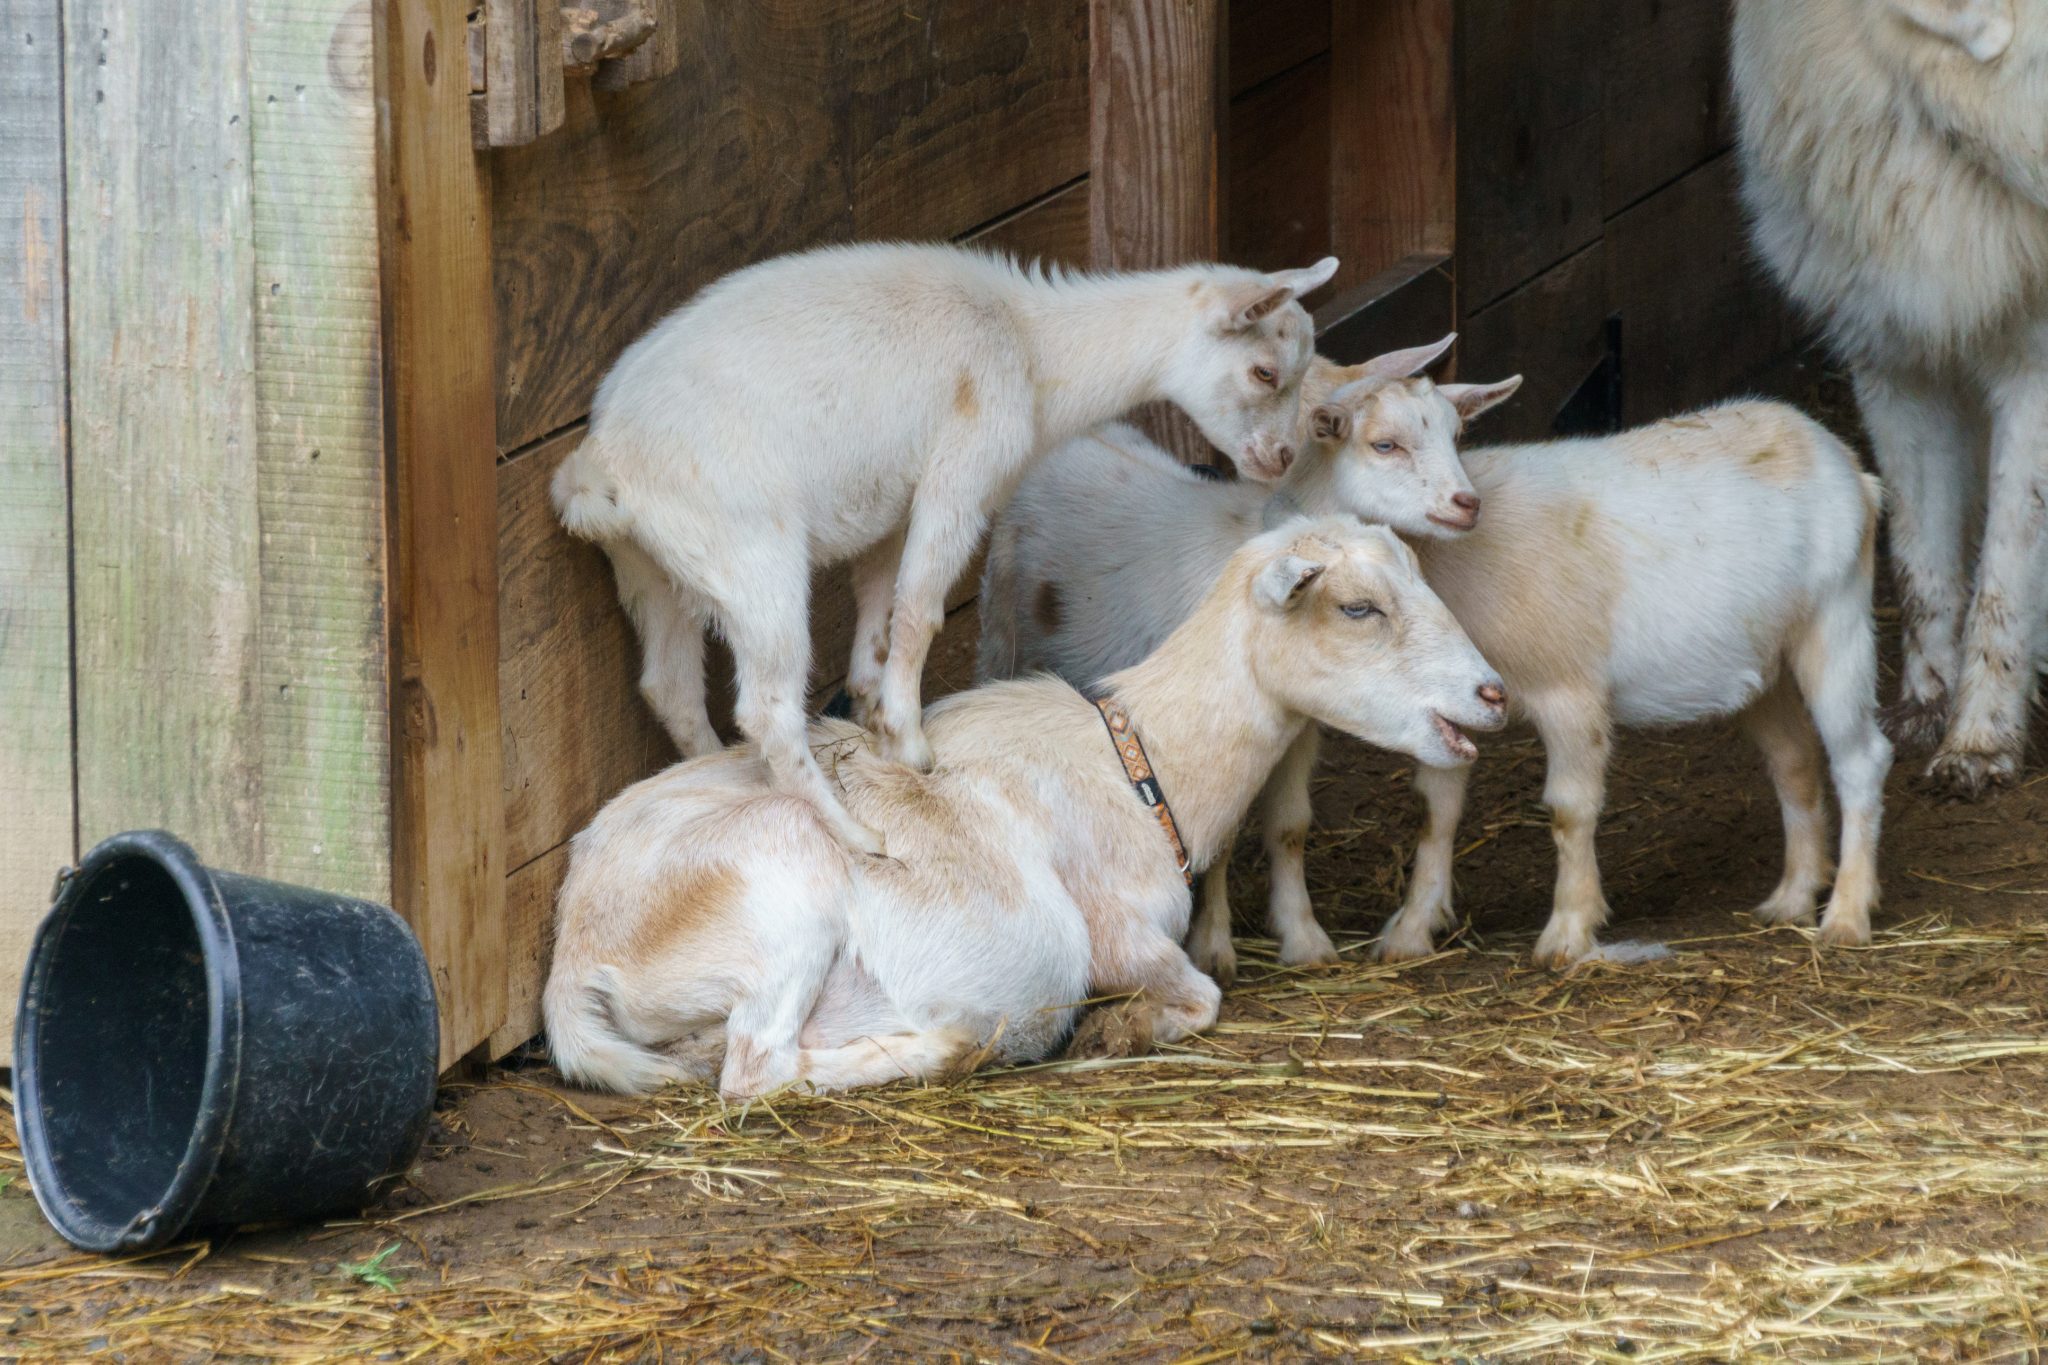 Small white goat standing on top of it's mother in a barn. They are lying down on the hay. A black bucket is overturned nearby.